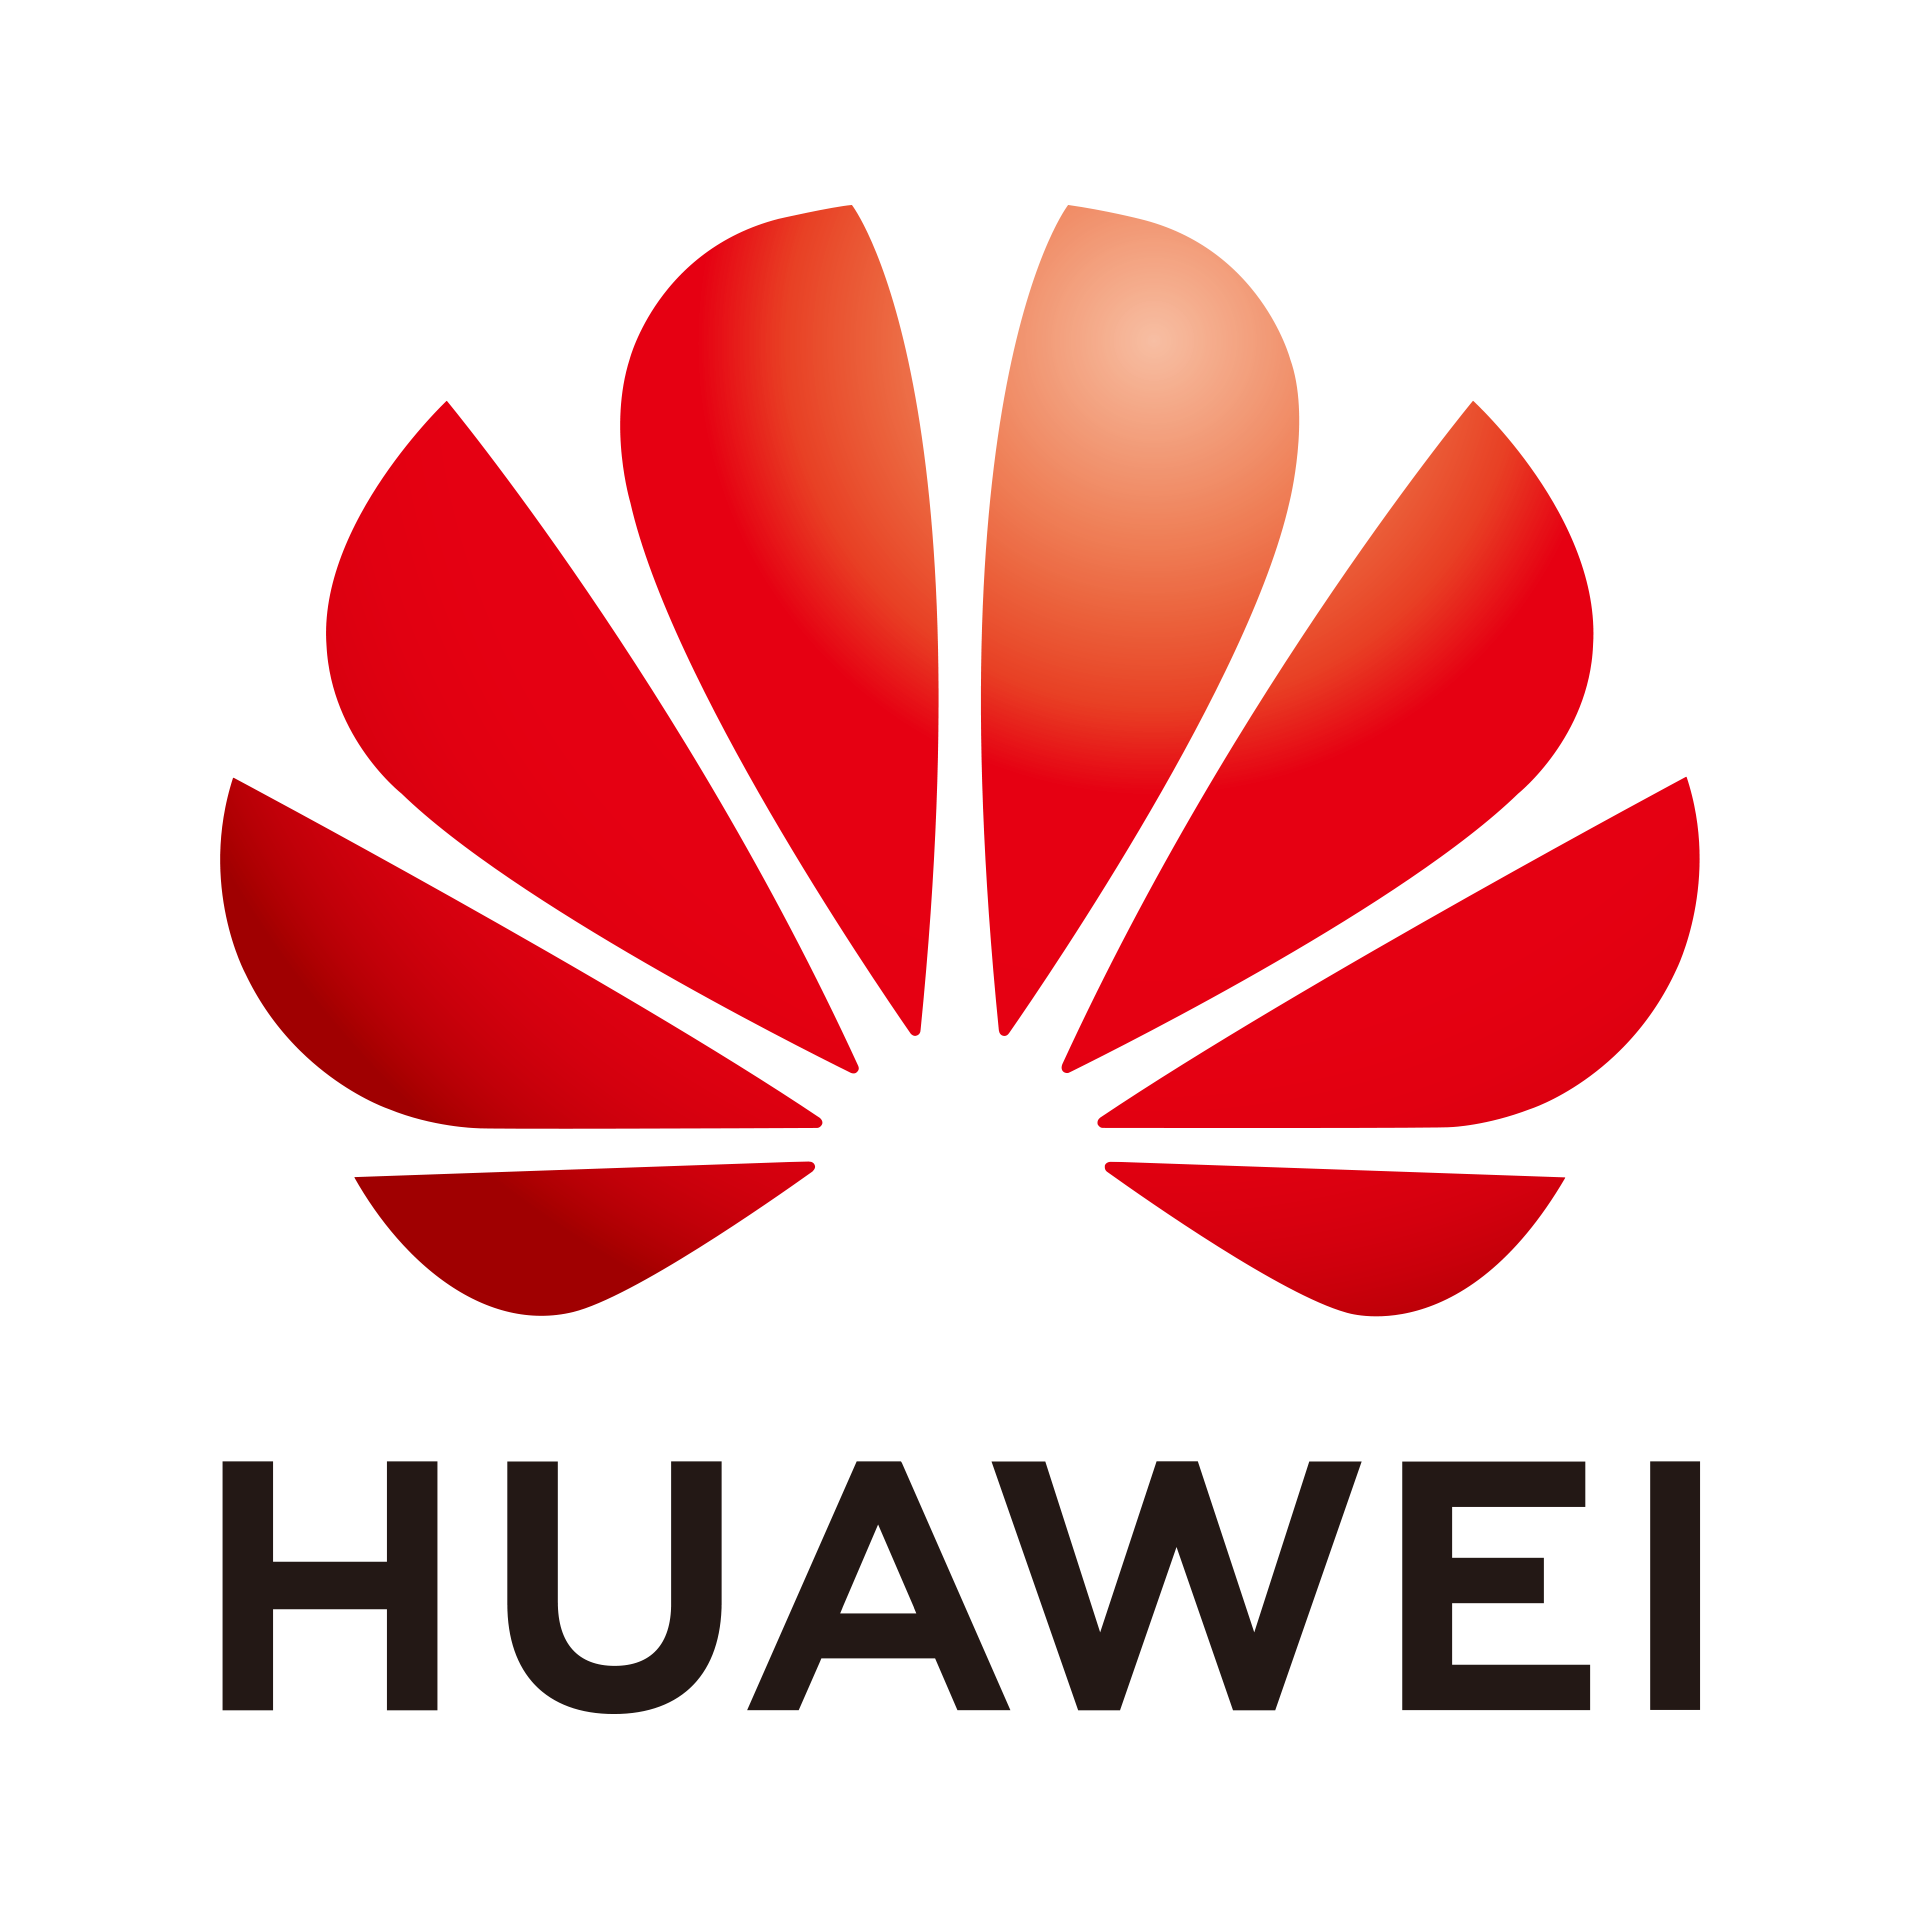 Chinese Tech Giant Huawei had Secret Offshore Contracts With Men Linked to Serbian State Telecom Company